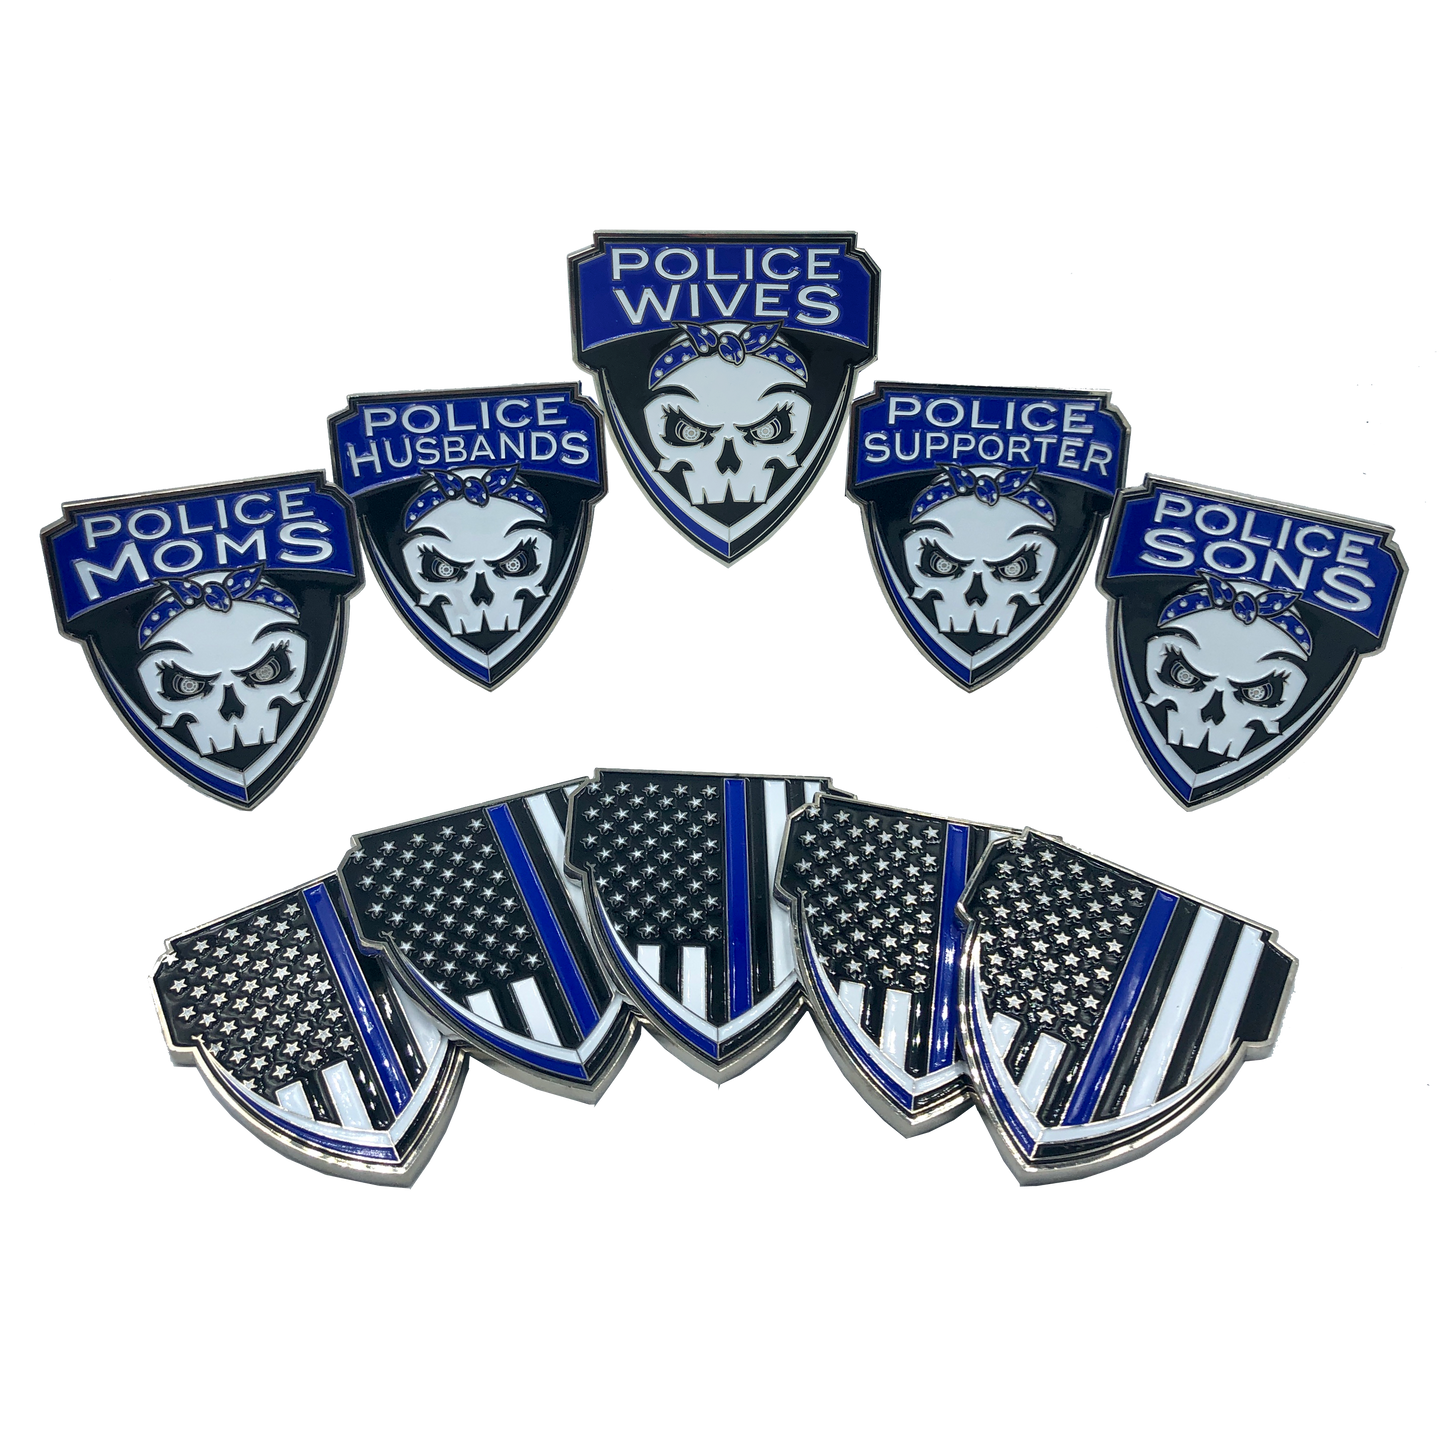 E-006 Police Wives Thin Blue Line Challenge Coin Supporter wife